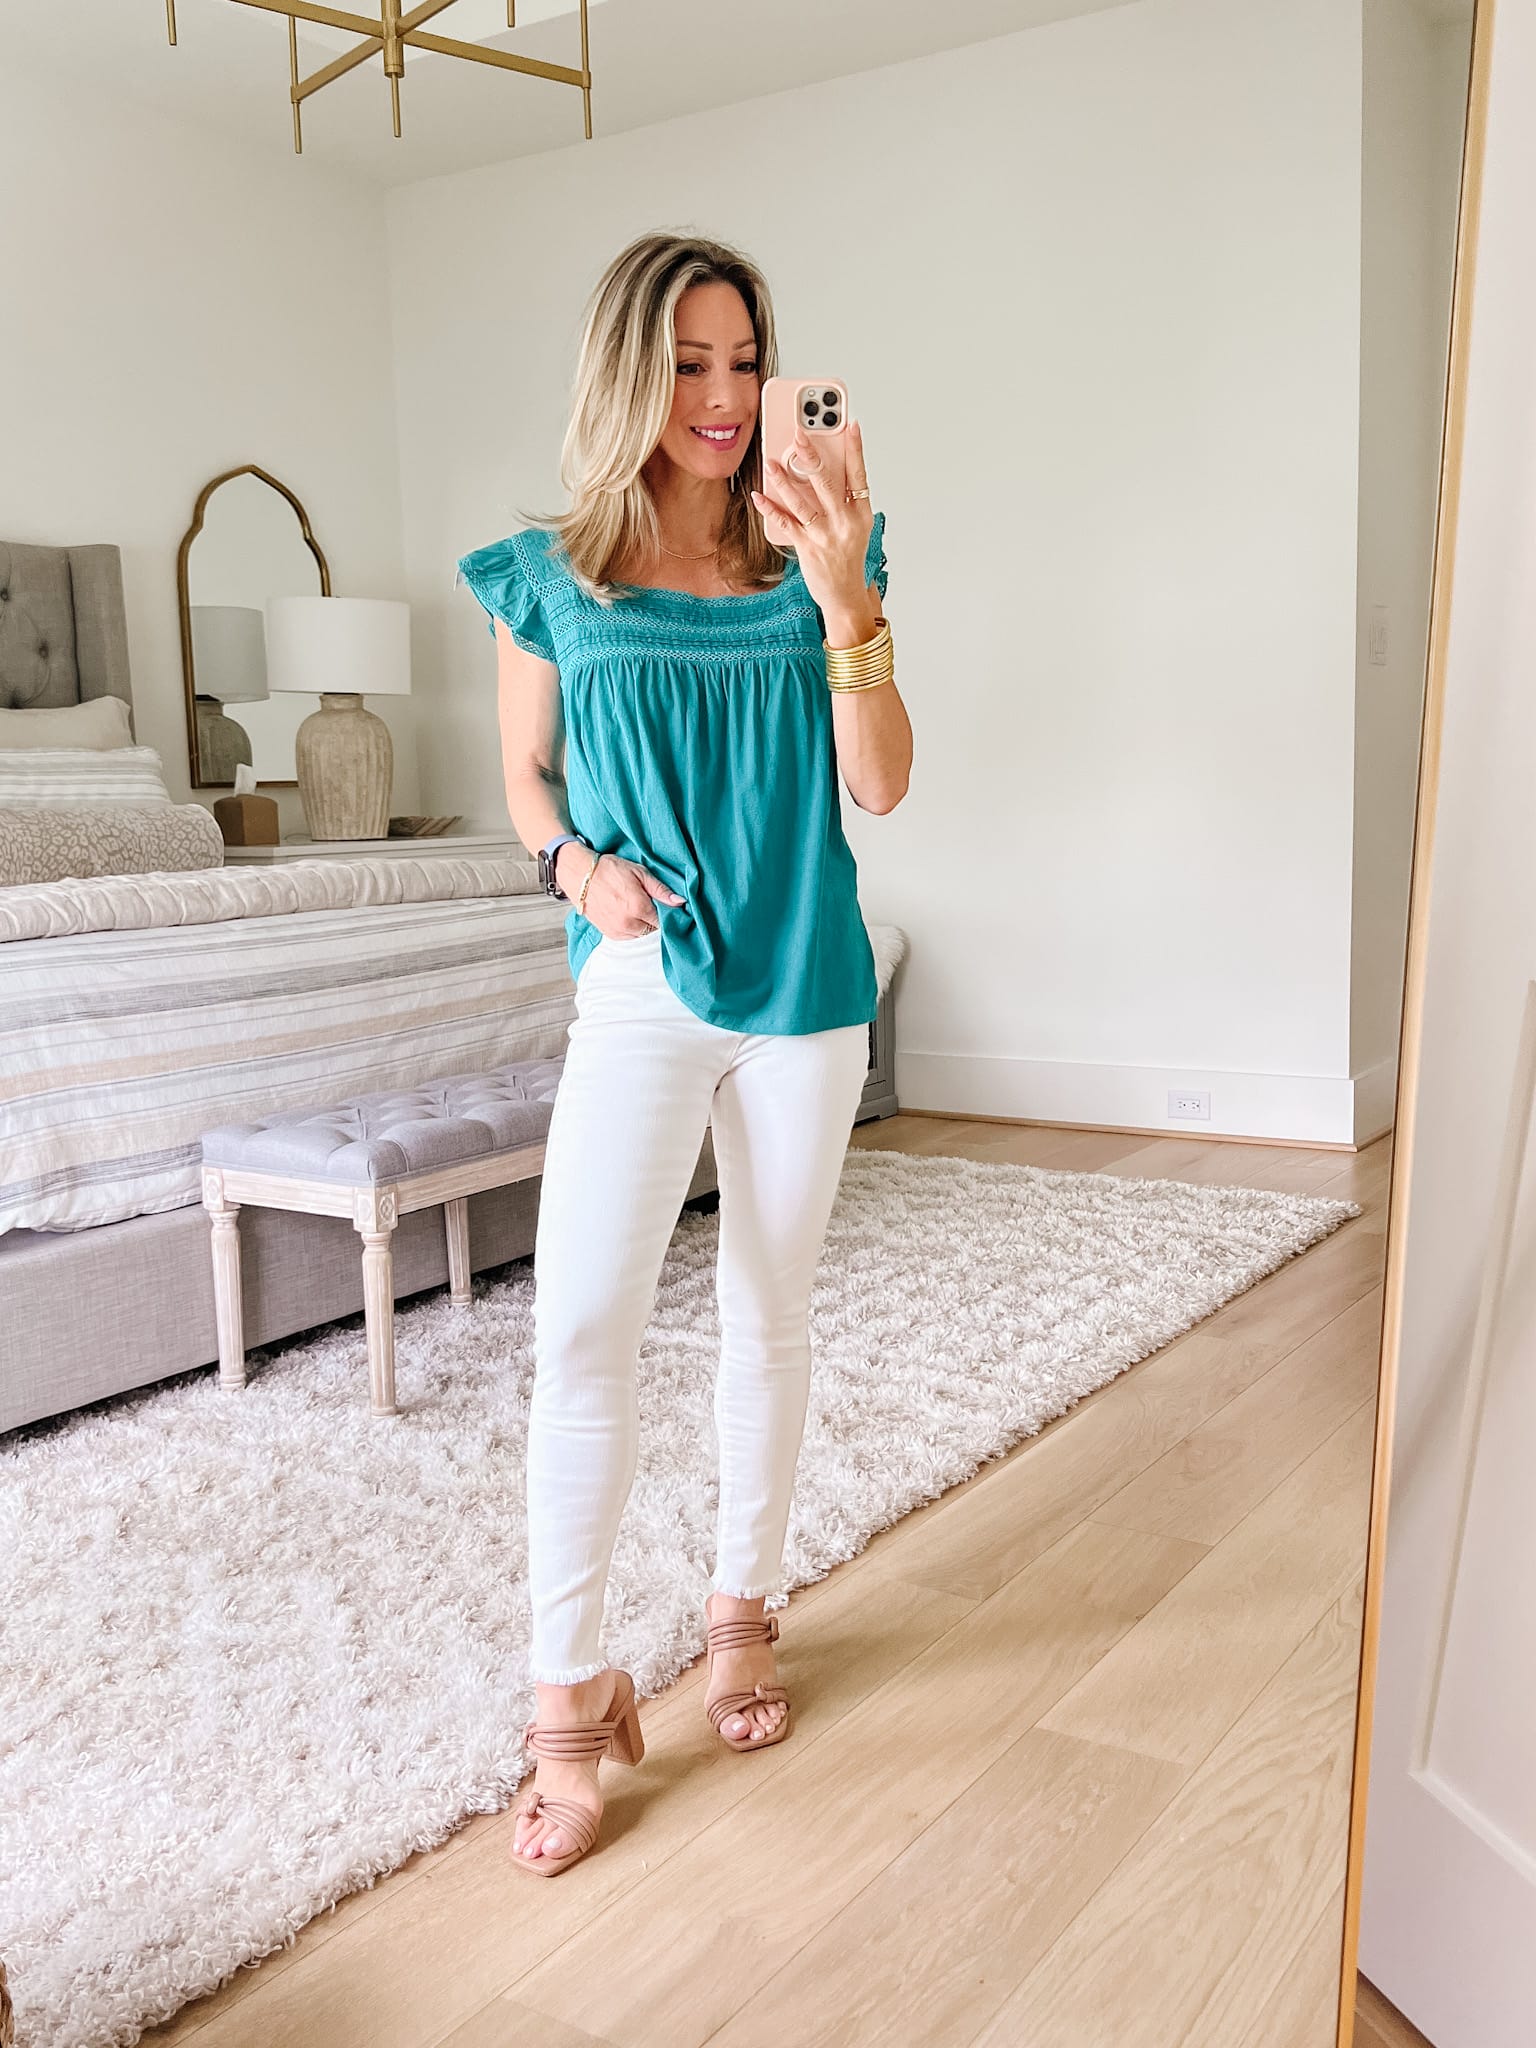 Ruffle Sleeve Top, White Jeans, Sandals 